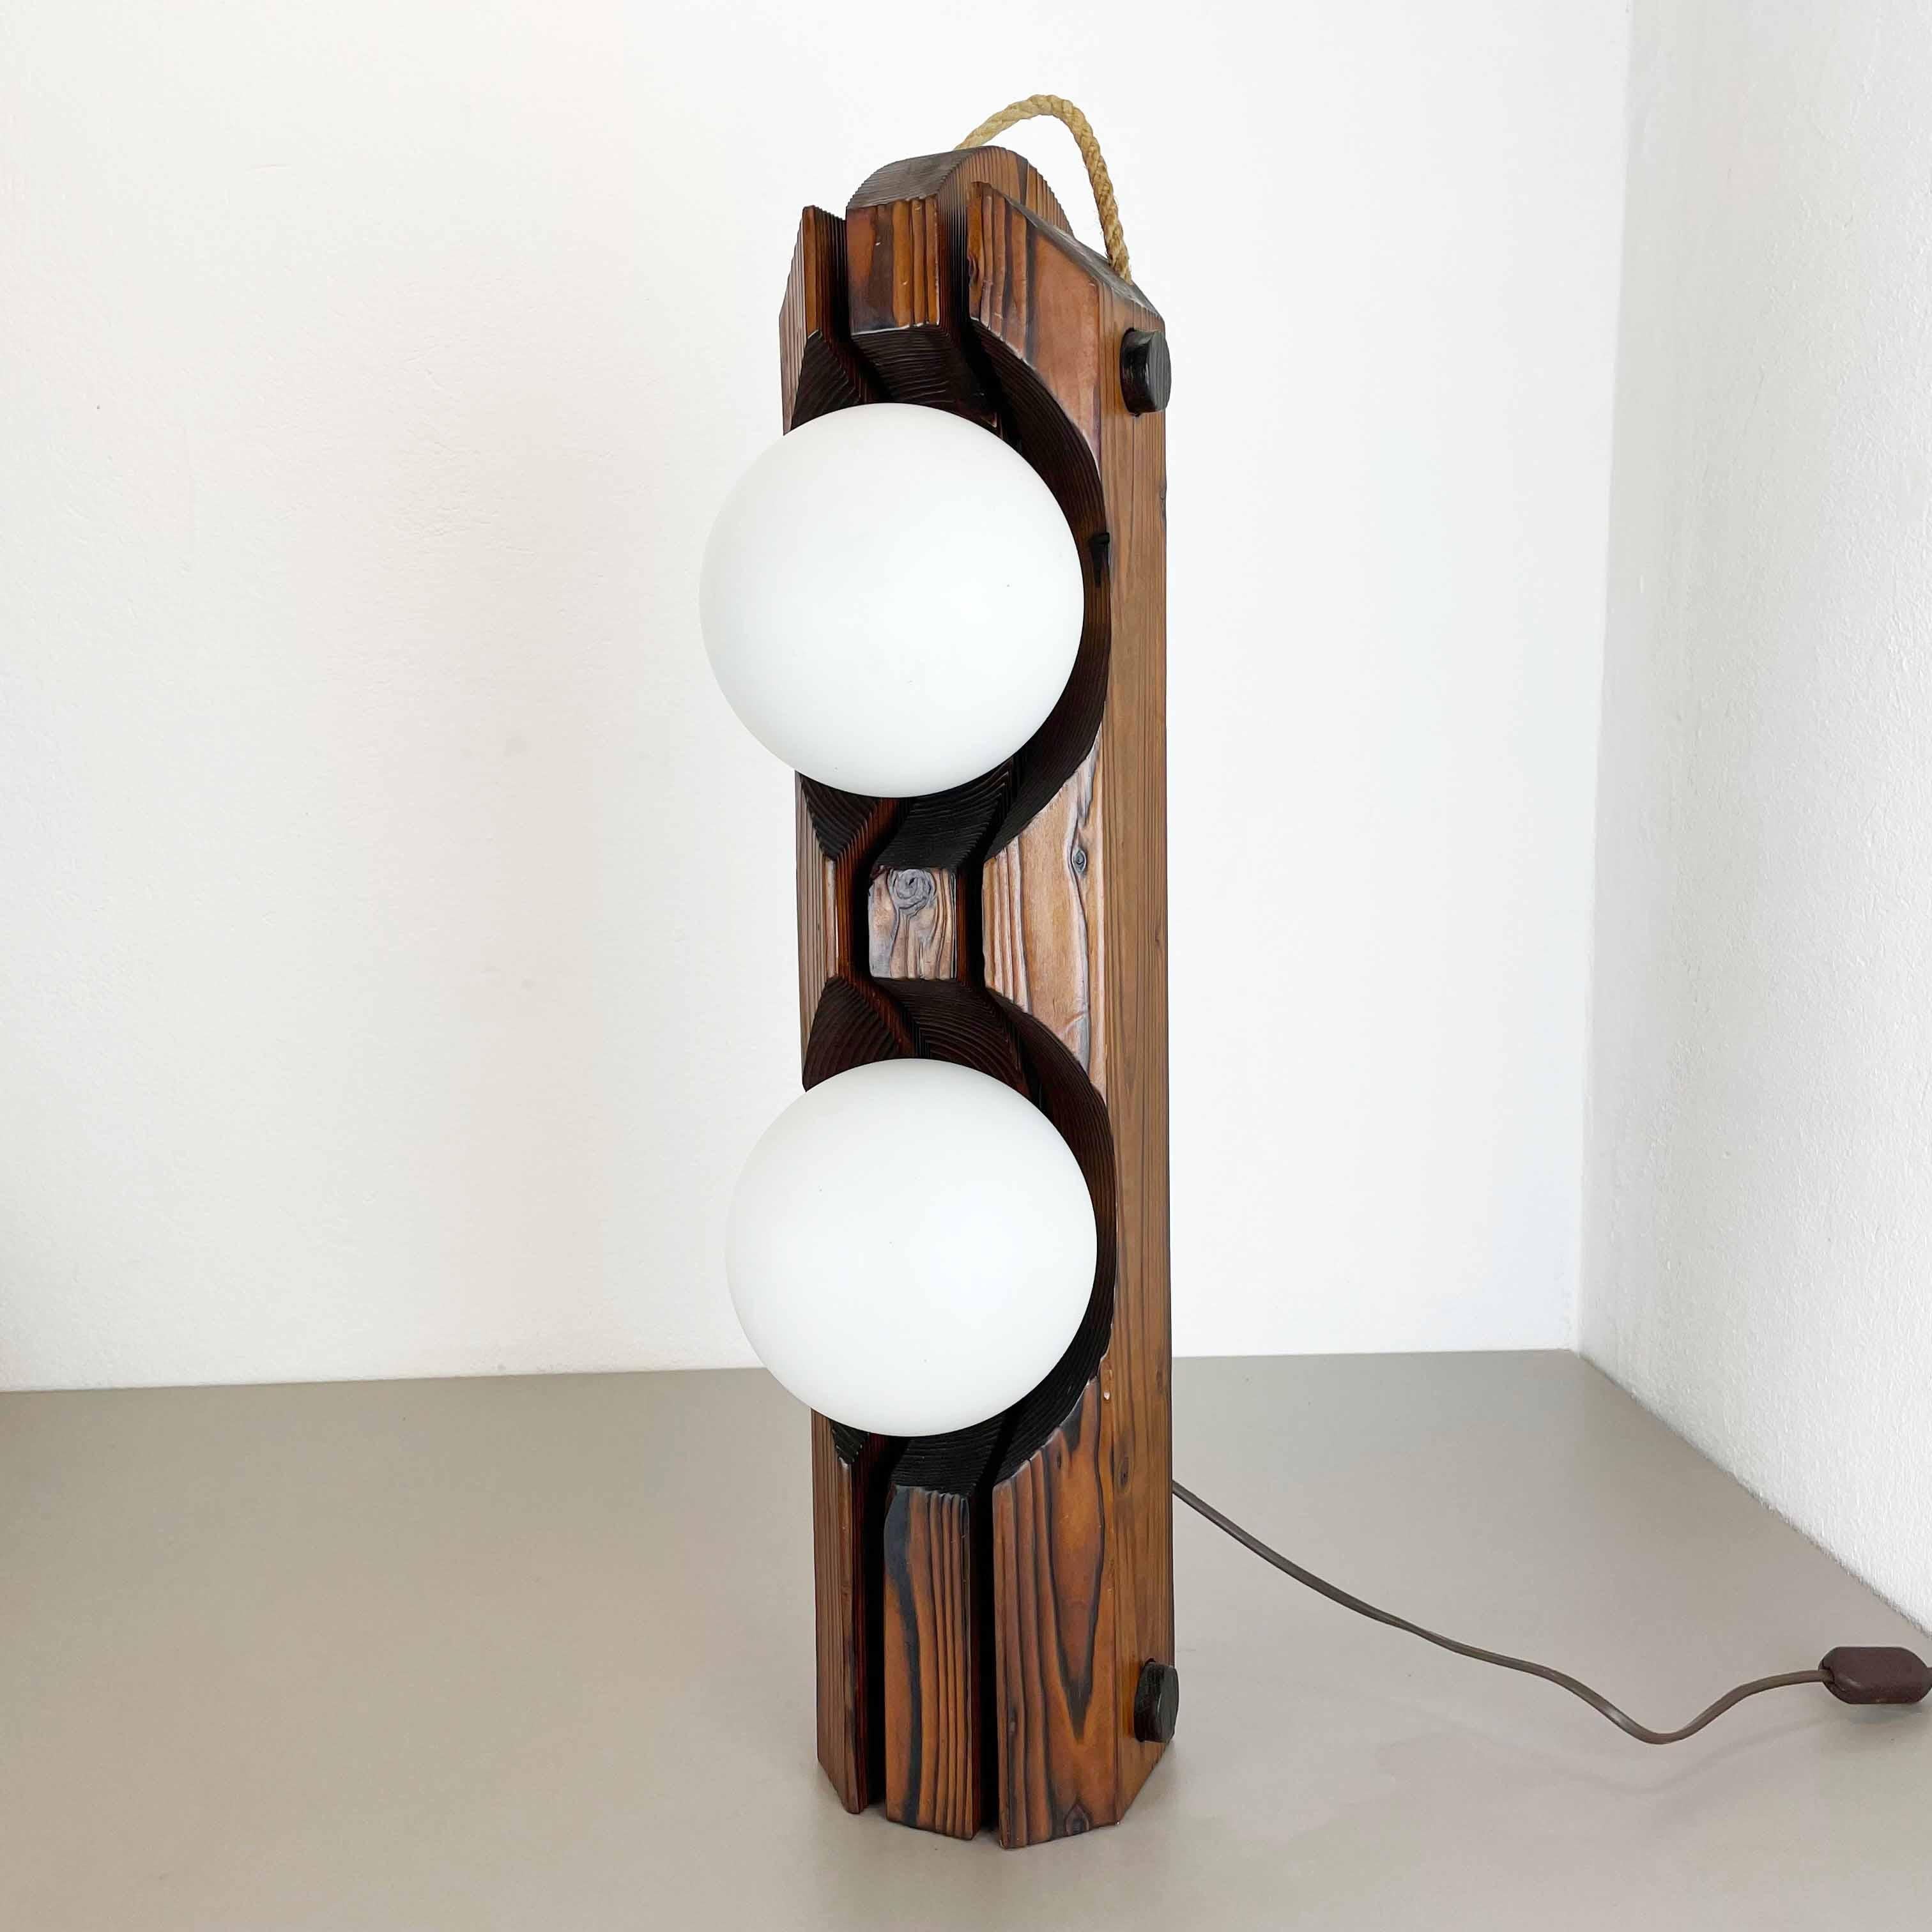 Article:

Wooden organic table light


Producer:

TEMDE Lights, Germany



Origin:

Germany



Age:

1970s




Original vintage 1970s pine wooden floor light made in Germany. High quality German production with a nice